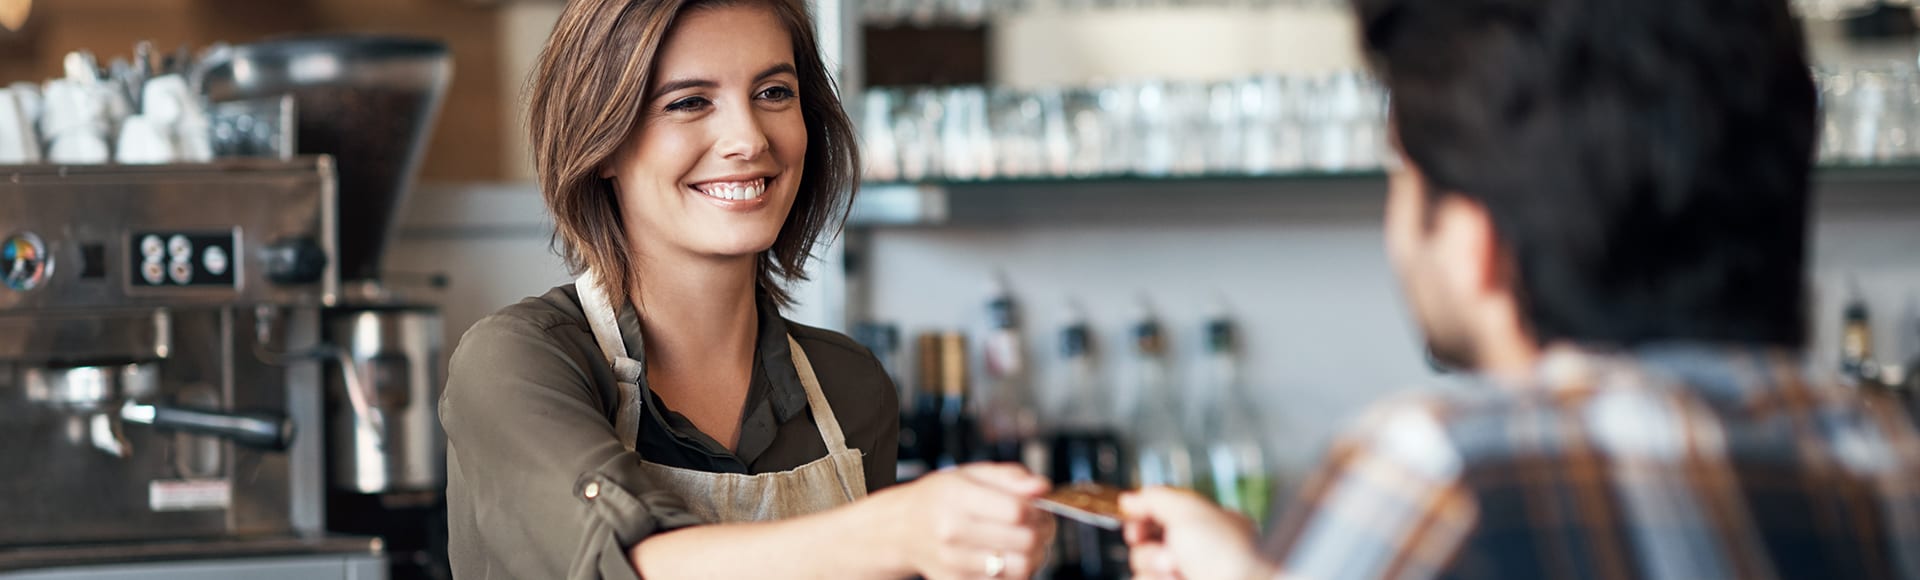 Shot of a cheerful female bartender receiving a card as payment from a customer inside of a restaurant